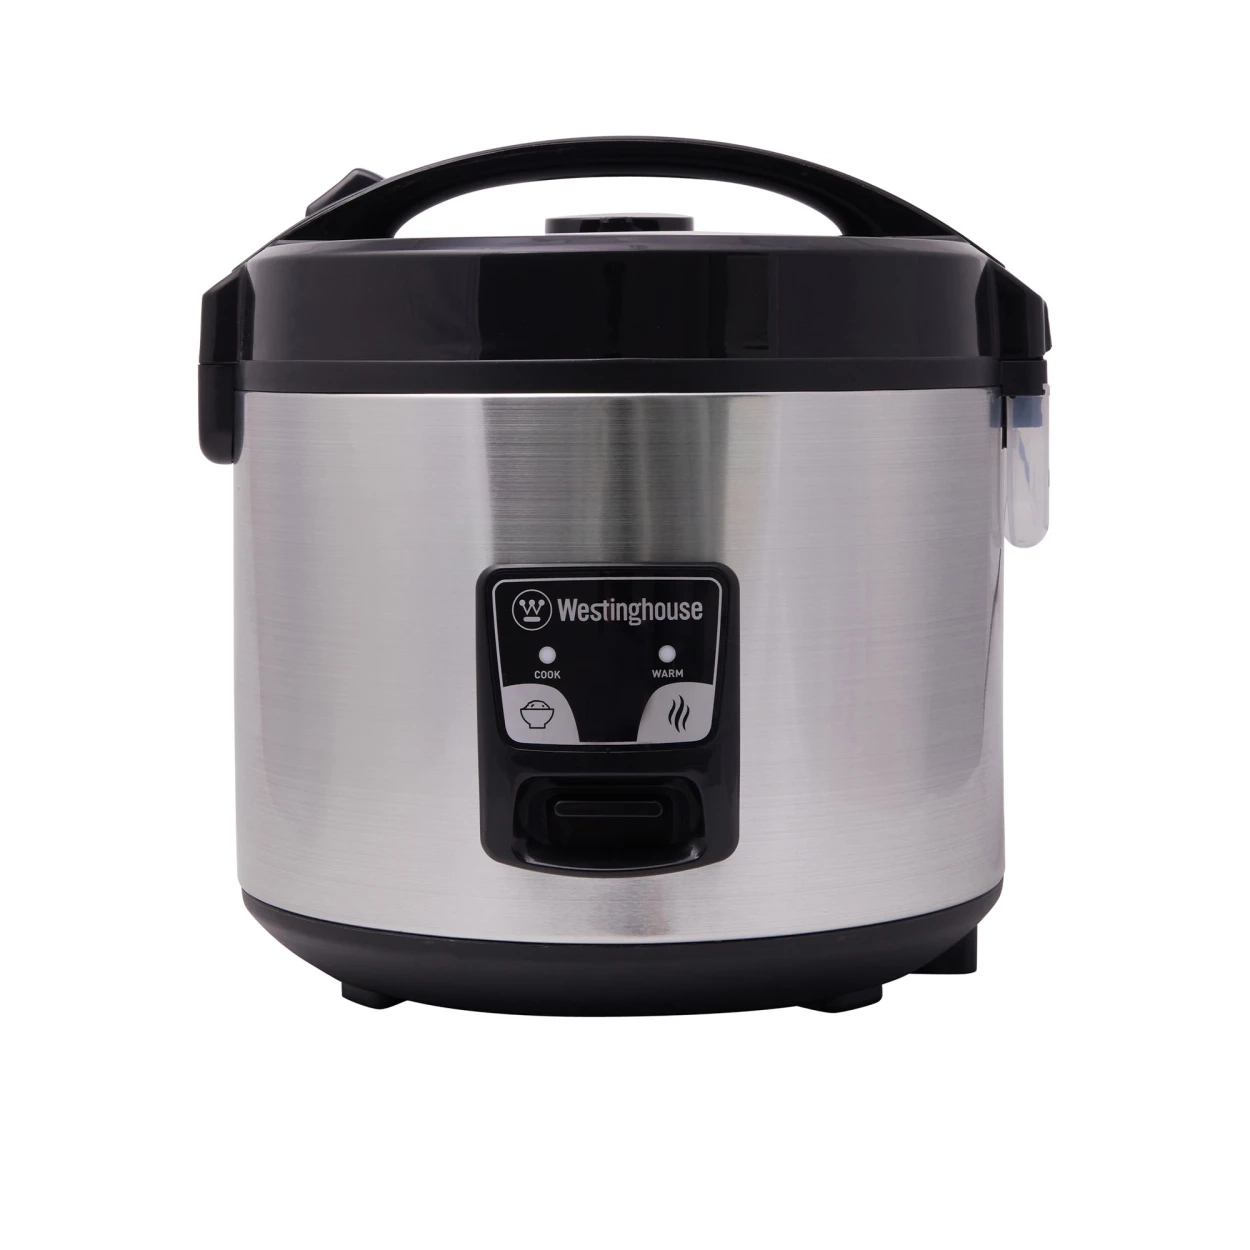 Westinghouse Rice Cooker 10 Cup Image 1